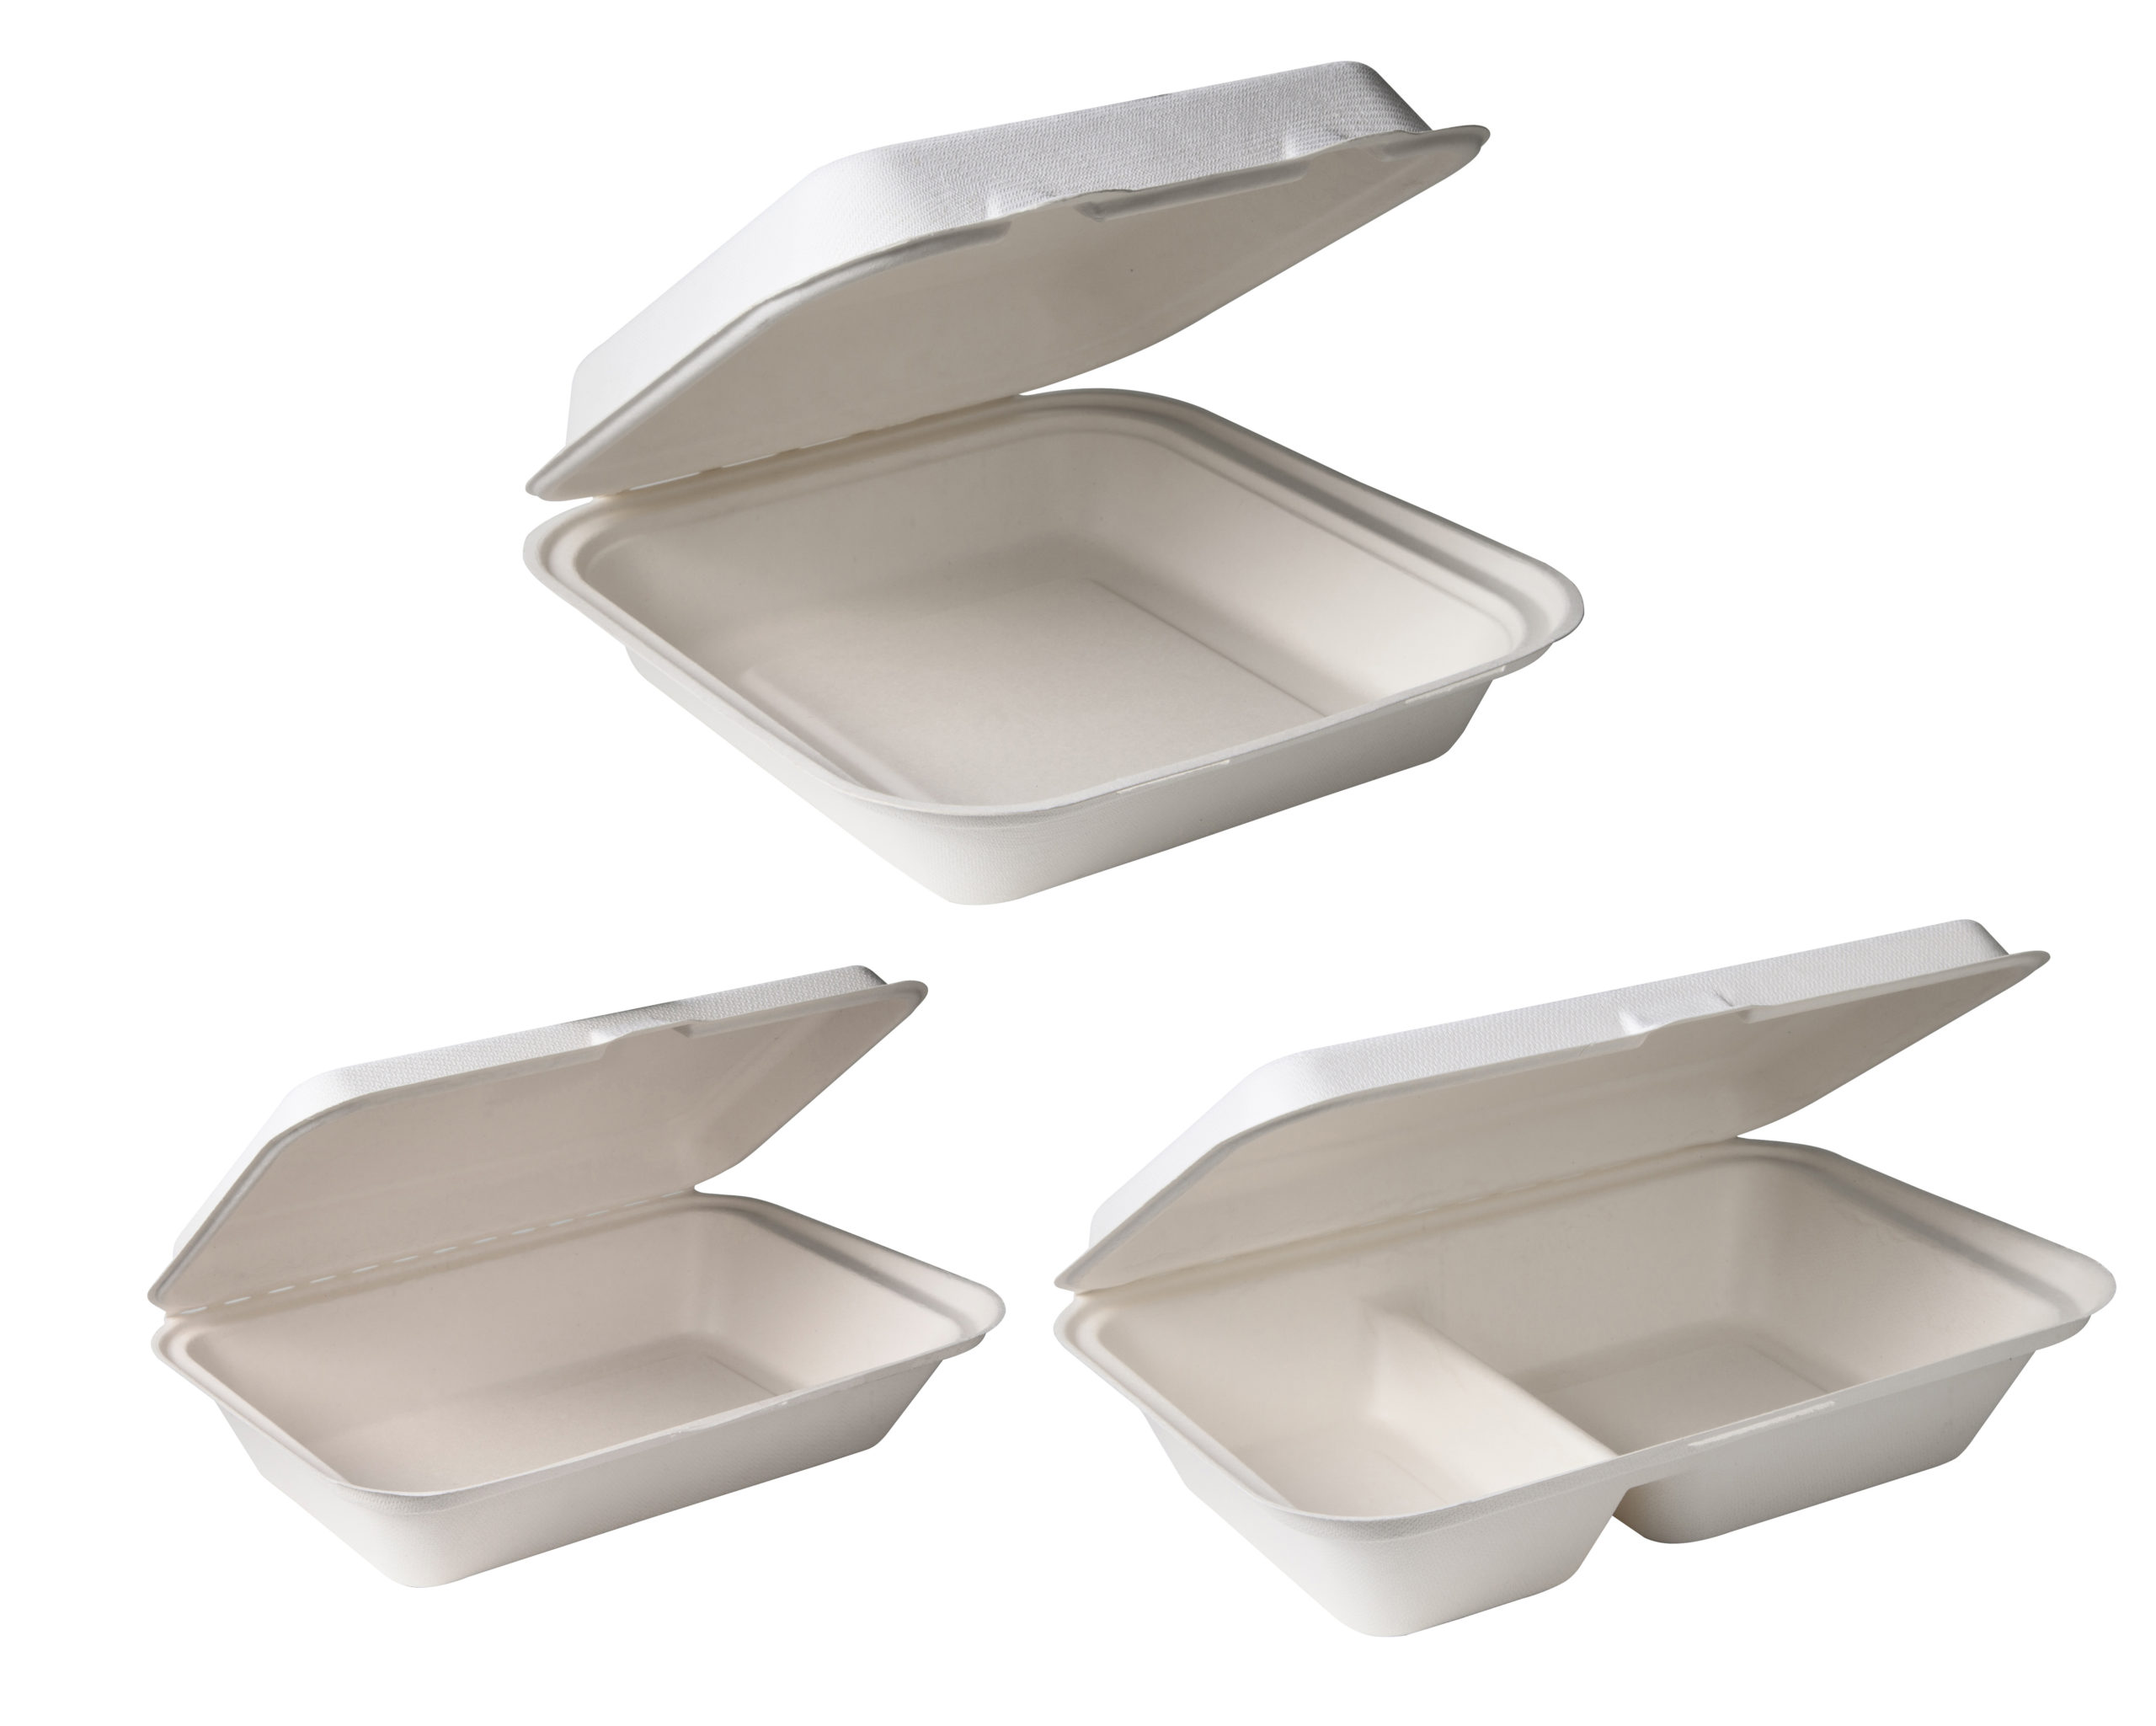 6x6x3 - Compostable Clear PLA Takeout Box (1000 count) – BioGreenChoice